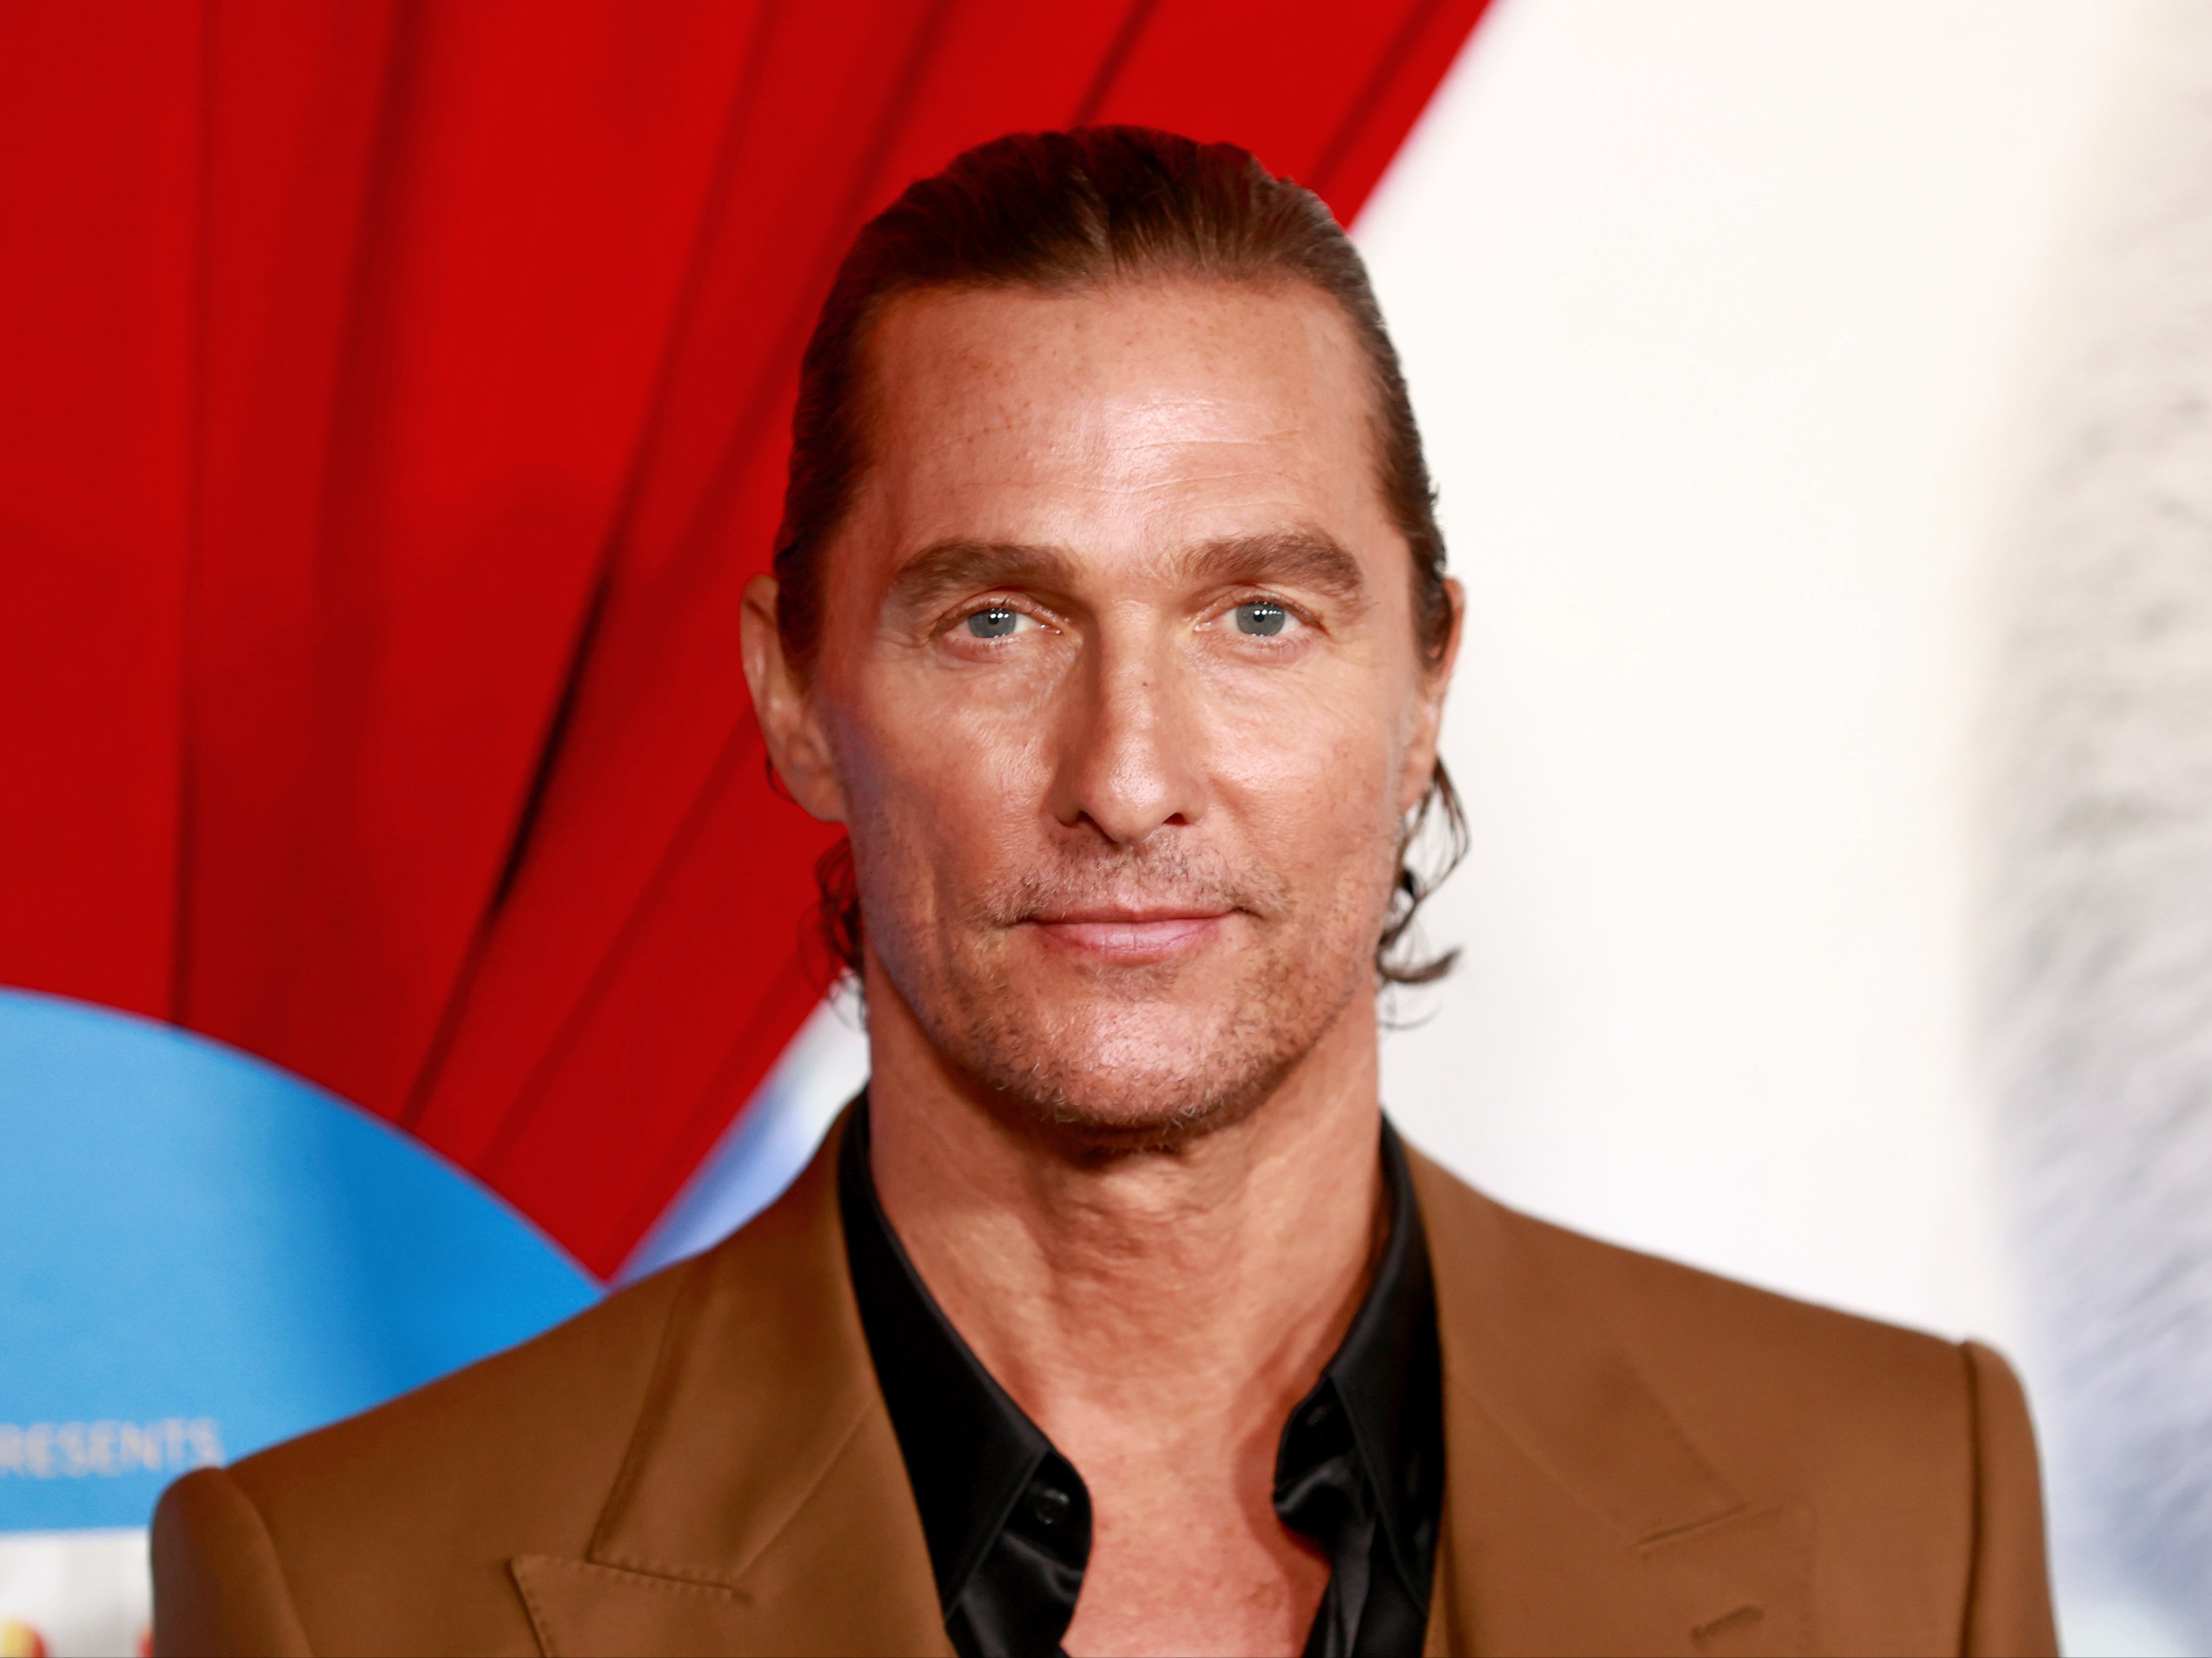 McConaughey could have starred alongside Kate Winslet in the ‘Titanic’